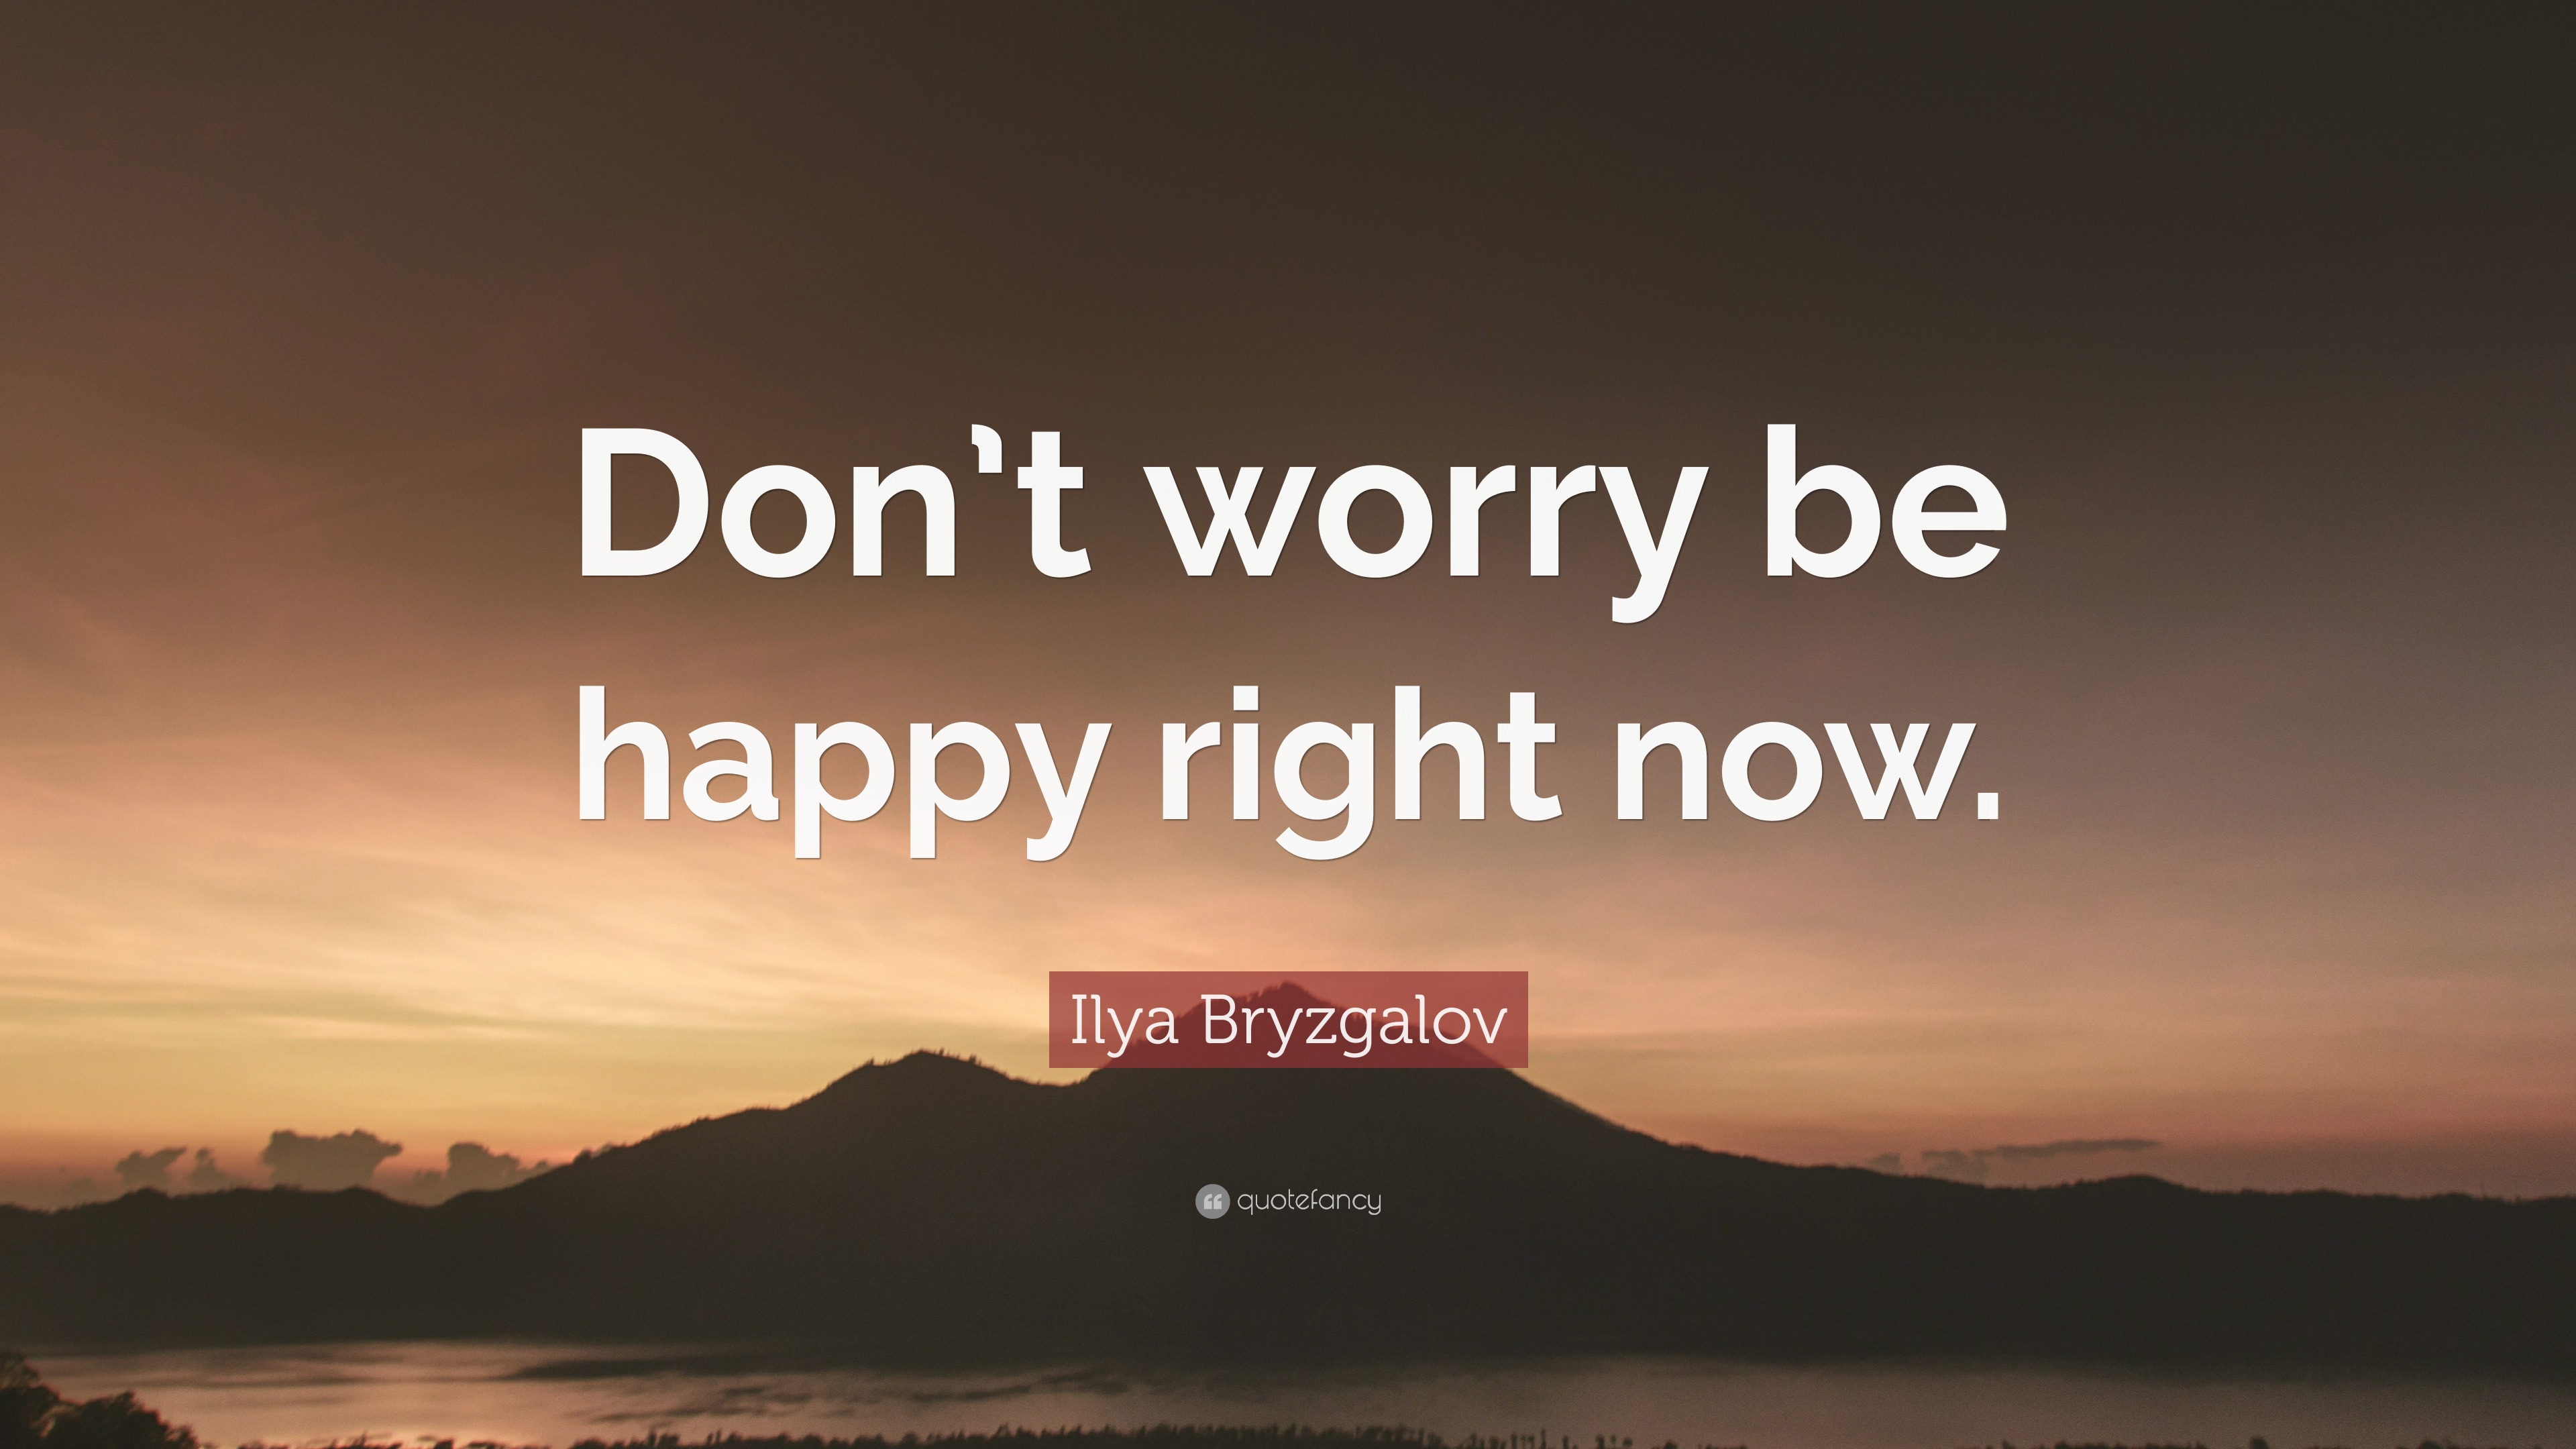 Ilya Bryzgalov Quote: "Don't worry be happy right now ...